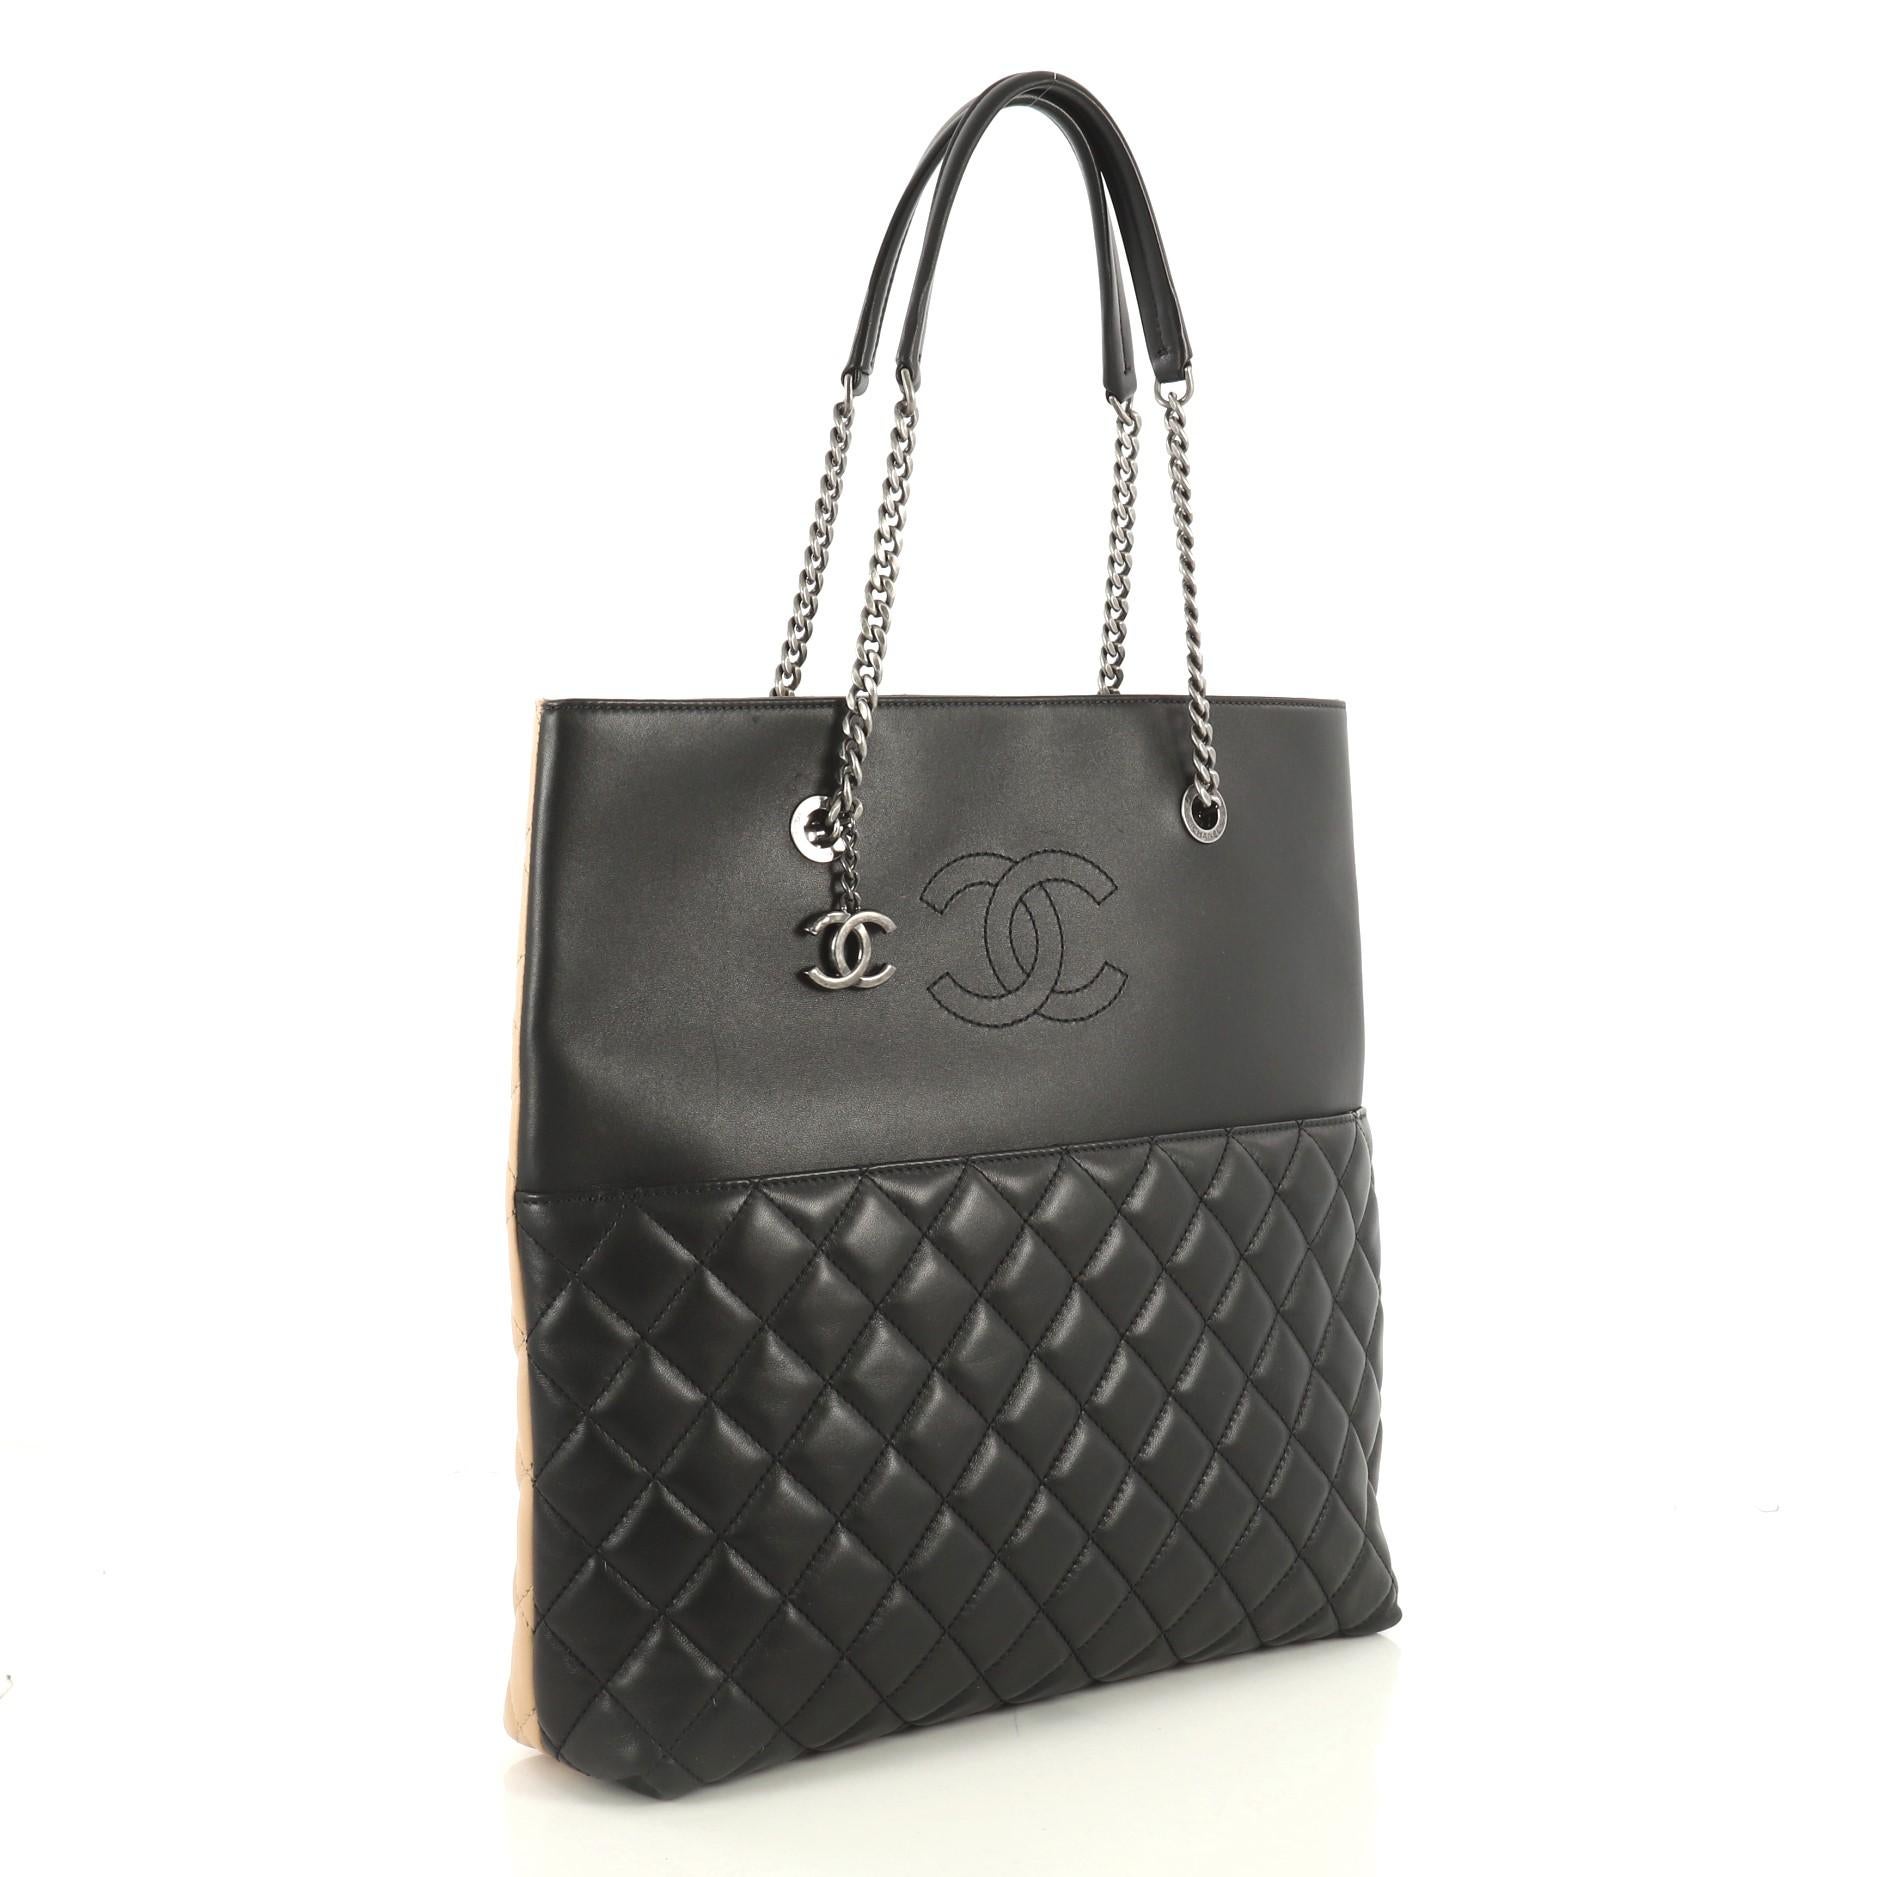 This Chanel Urban Delight Chain Tote Quilted Lambskin Large, crafted from black quilted lambskin leather, features dual chain link straps with leather pads, exterior slip pocket, and aged silver-tone hardware. Its magnetic snap button closure opens